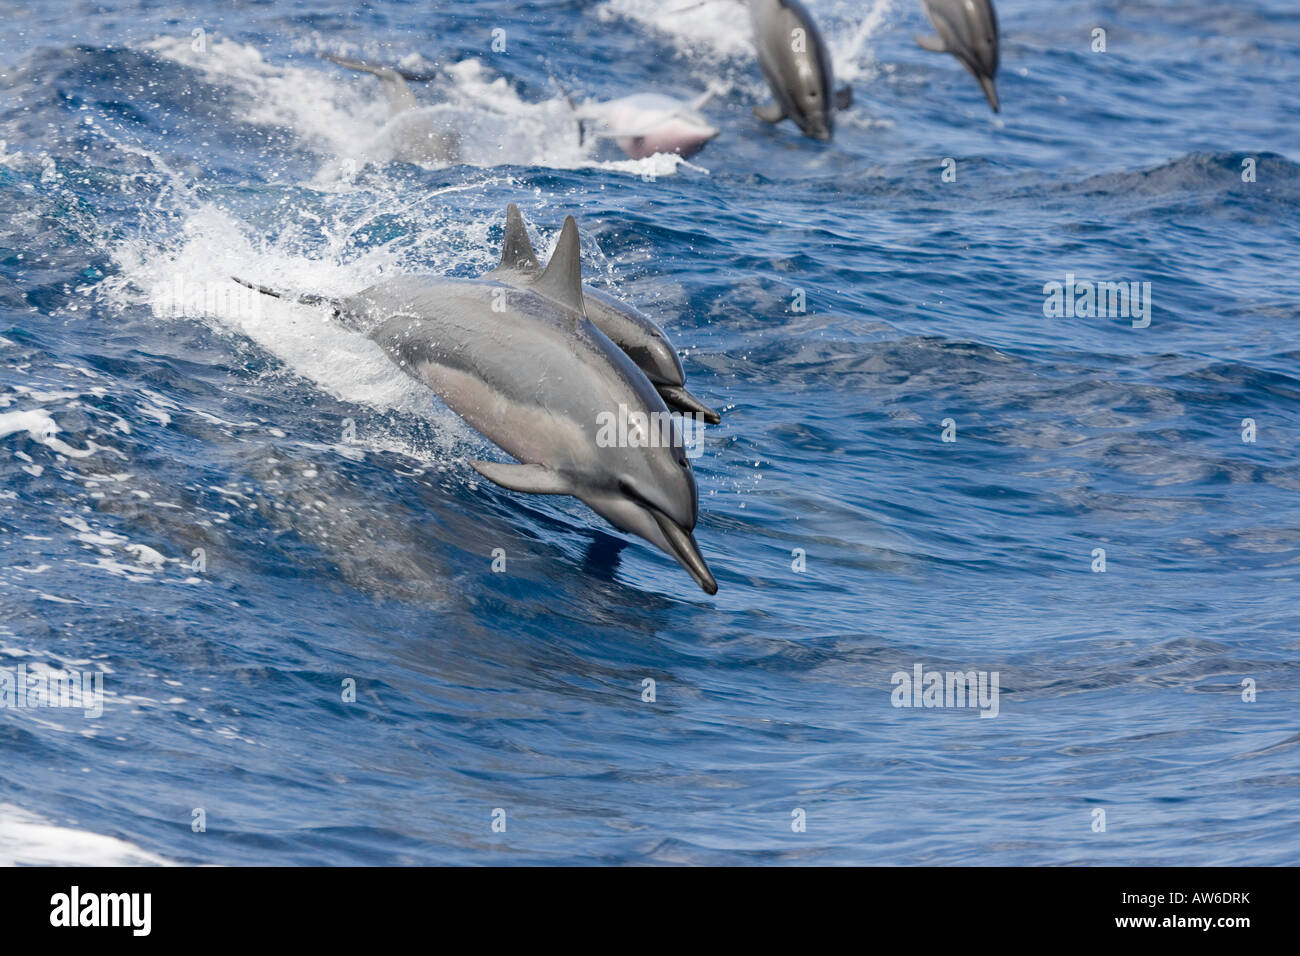 Spinner dolphin, Stenella longirostris, leap into the Pacific air at the same time, Hawaii. Stock Photo